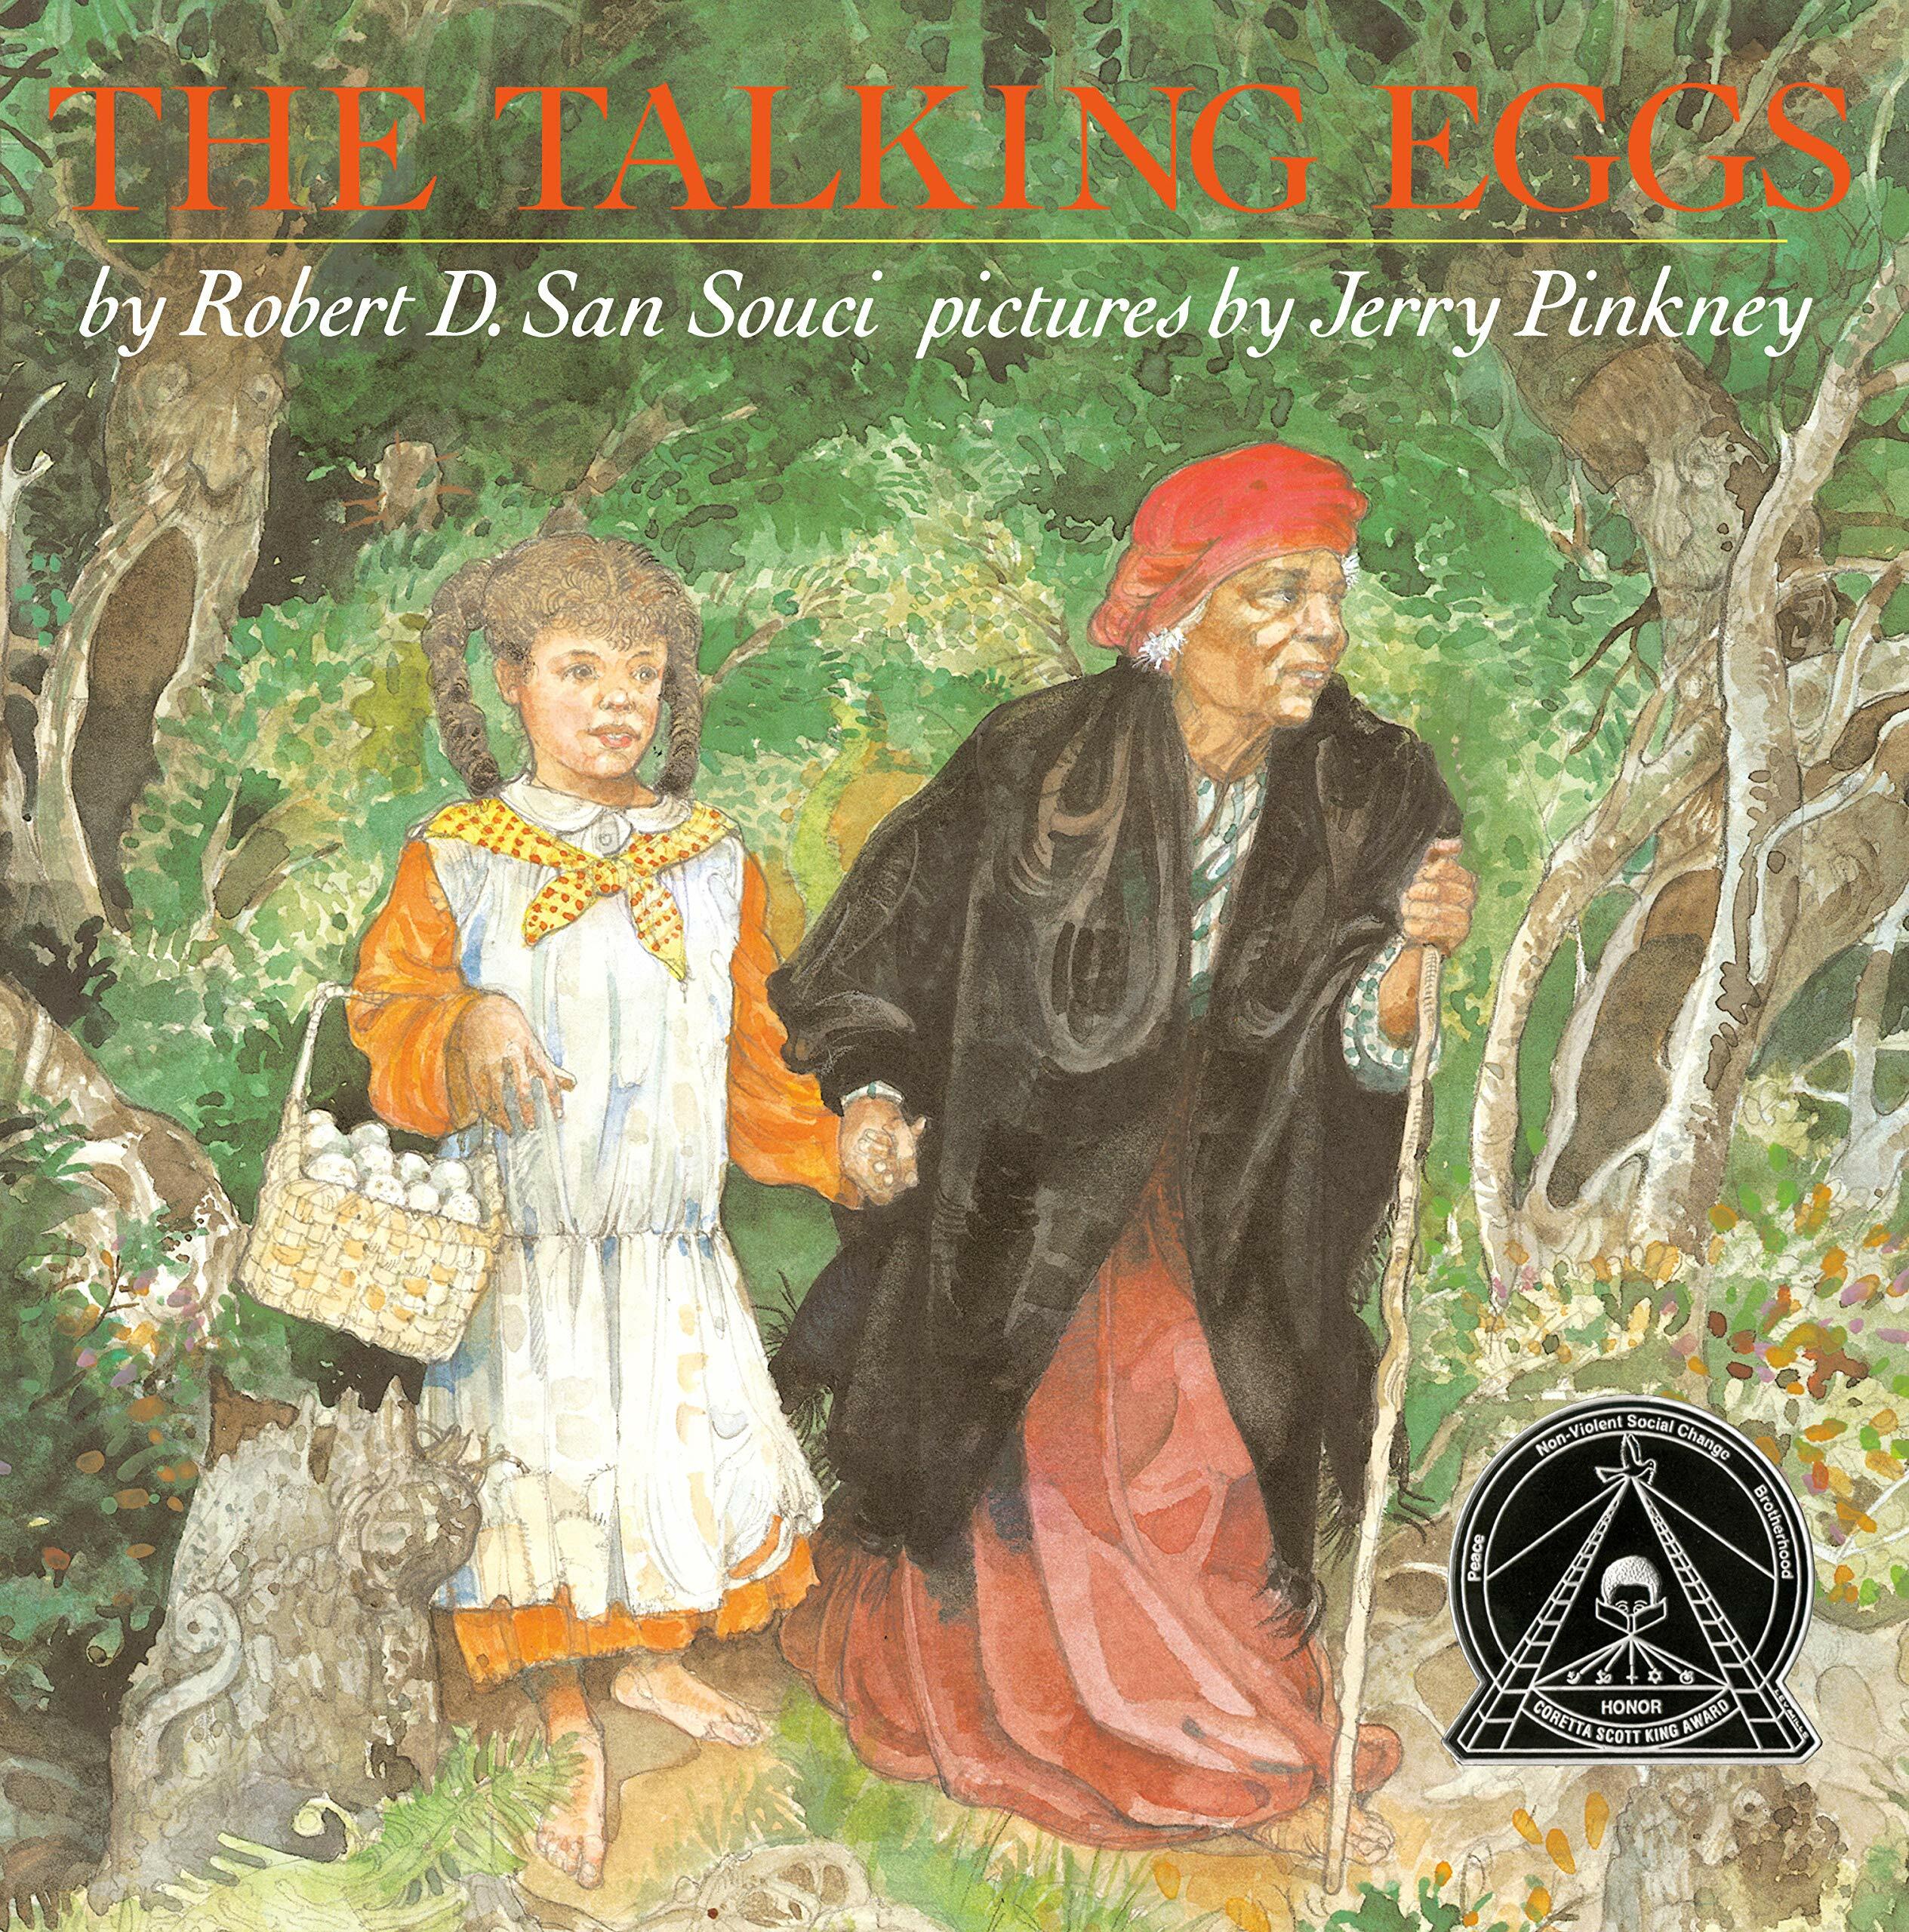 The Talking Eggs: A Folktale from the American South (Hardcover)